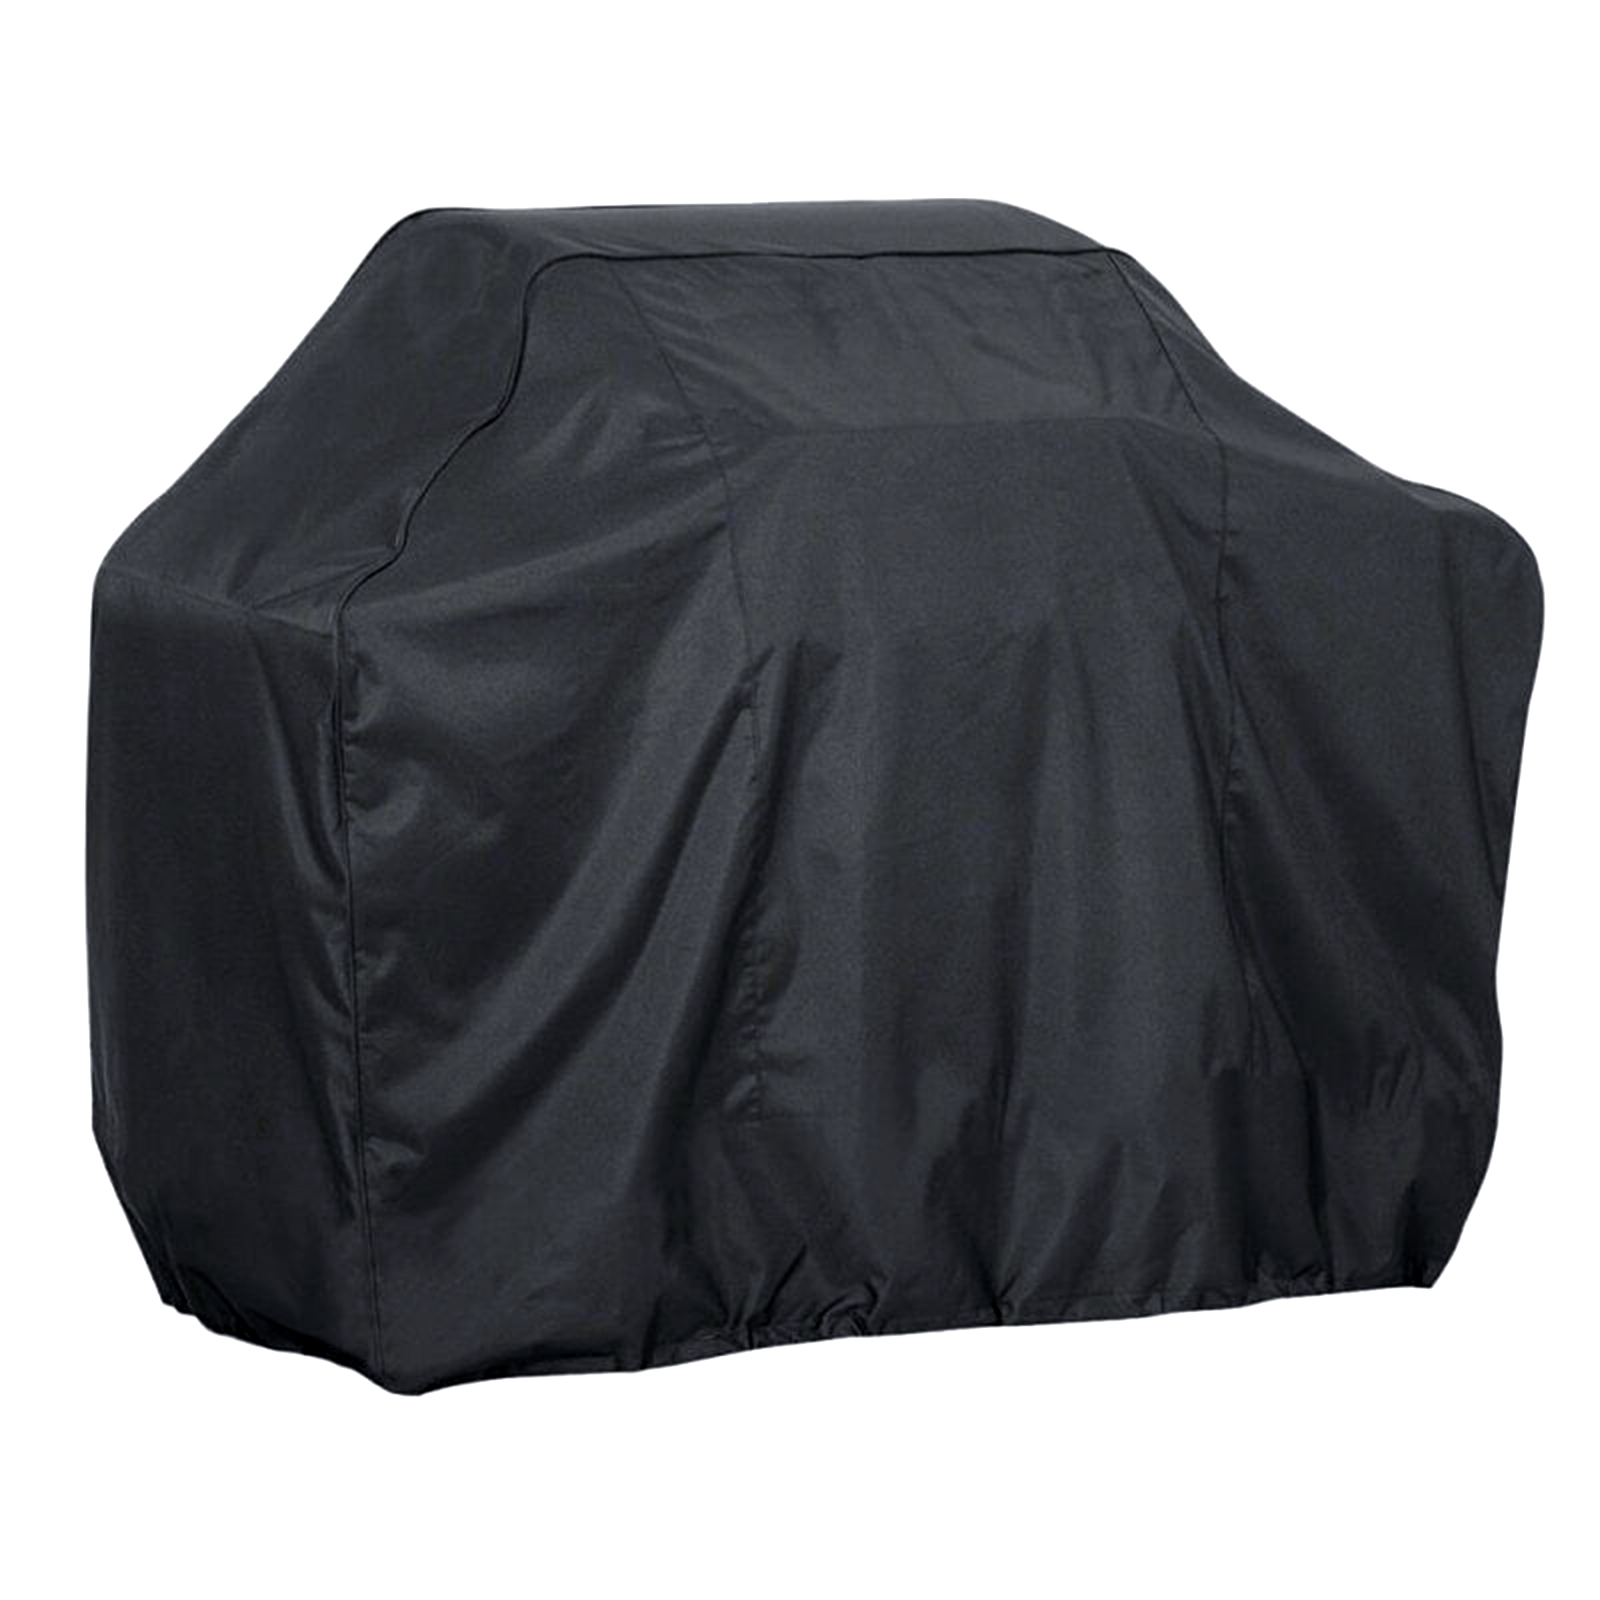 bbq grill cover gas heavy duty for home patio garden